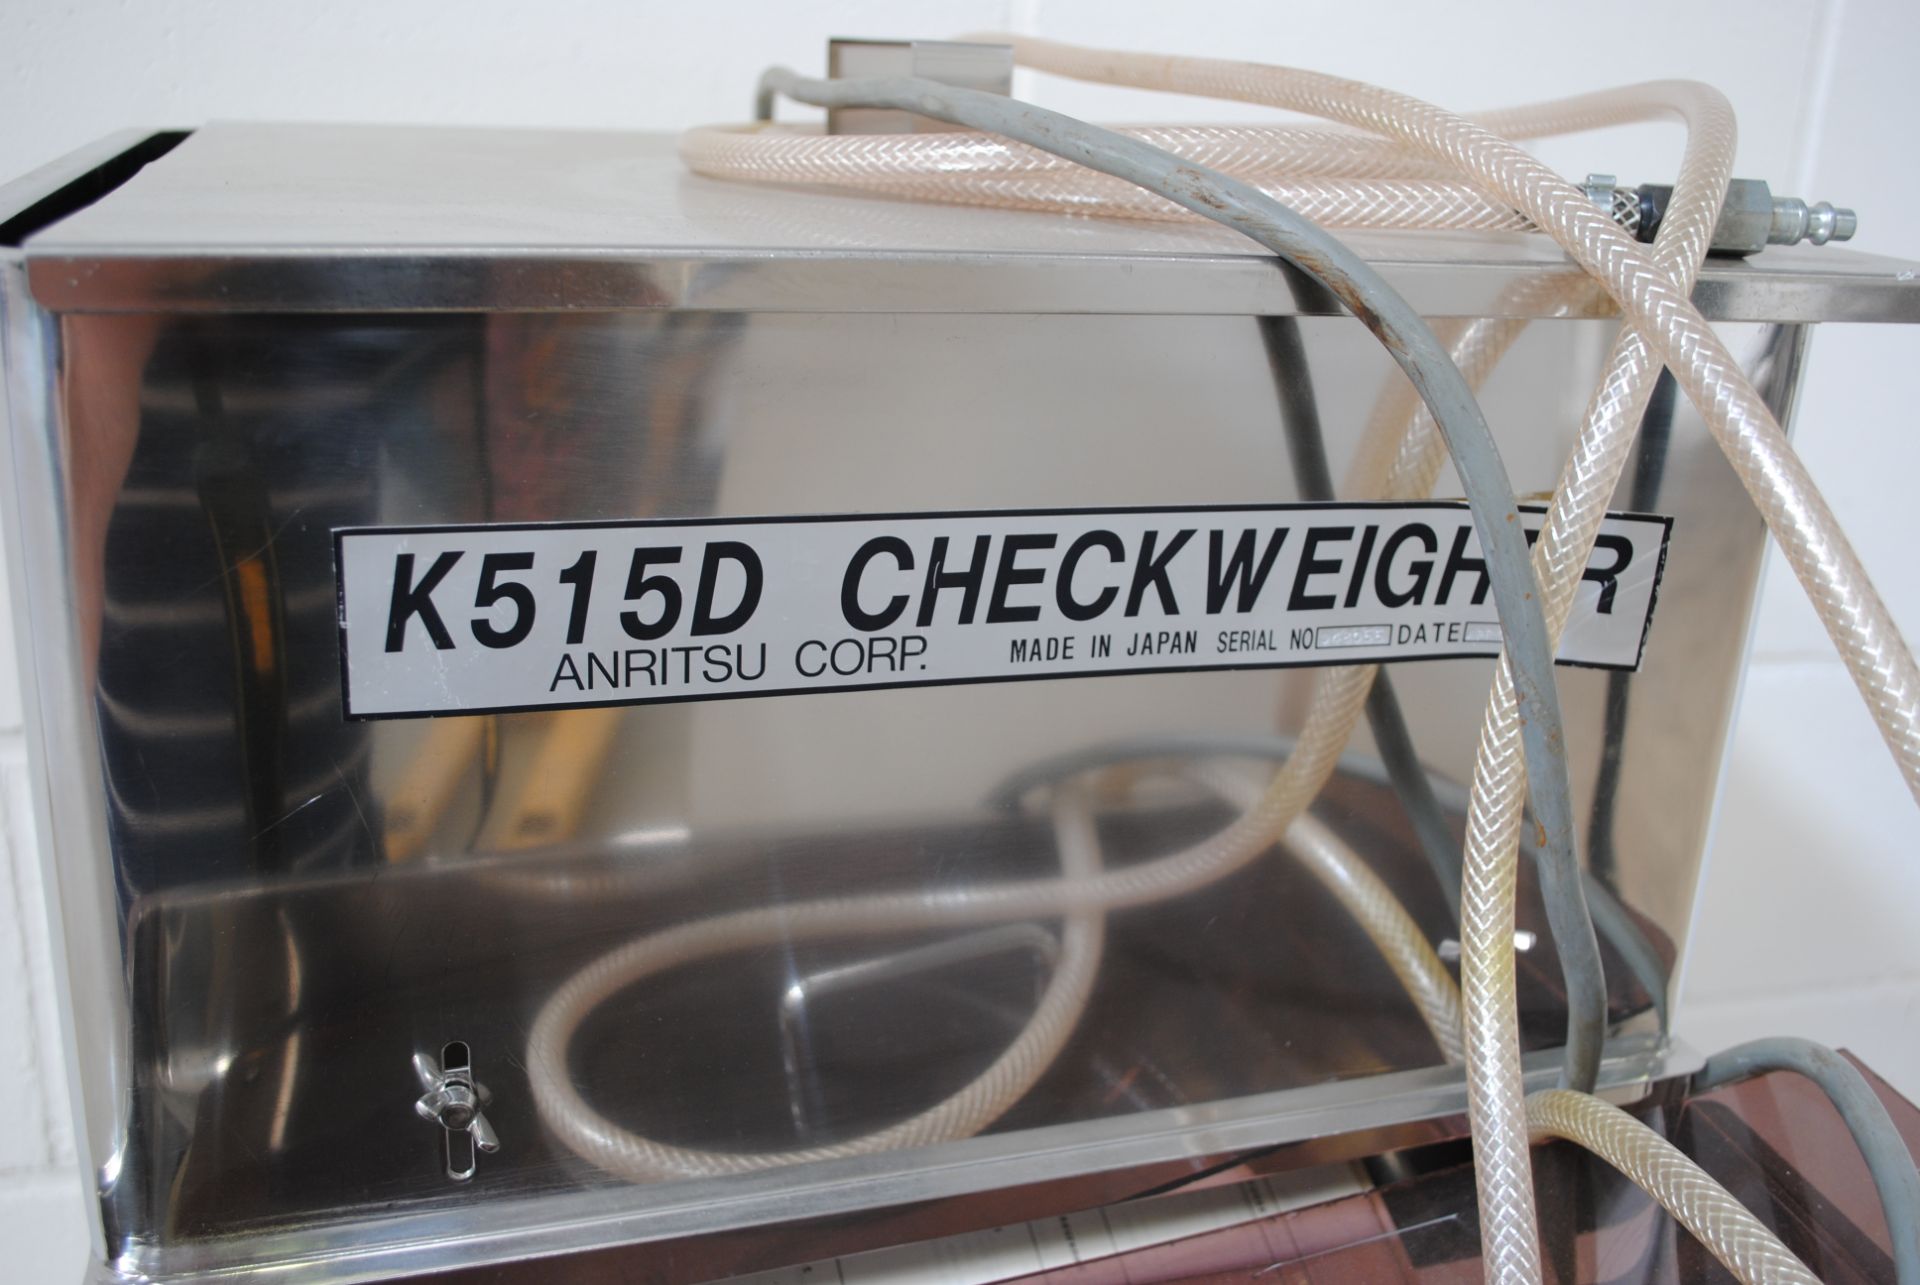 Aniritsu Capsule / Tablet Checkweigher Model: K51 5D with K261d Data Recorder S/N:A306 Year: 21/2/ - Image 4 of 8